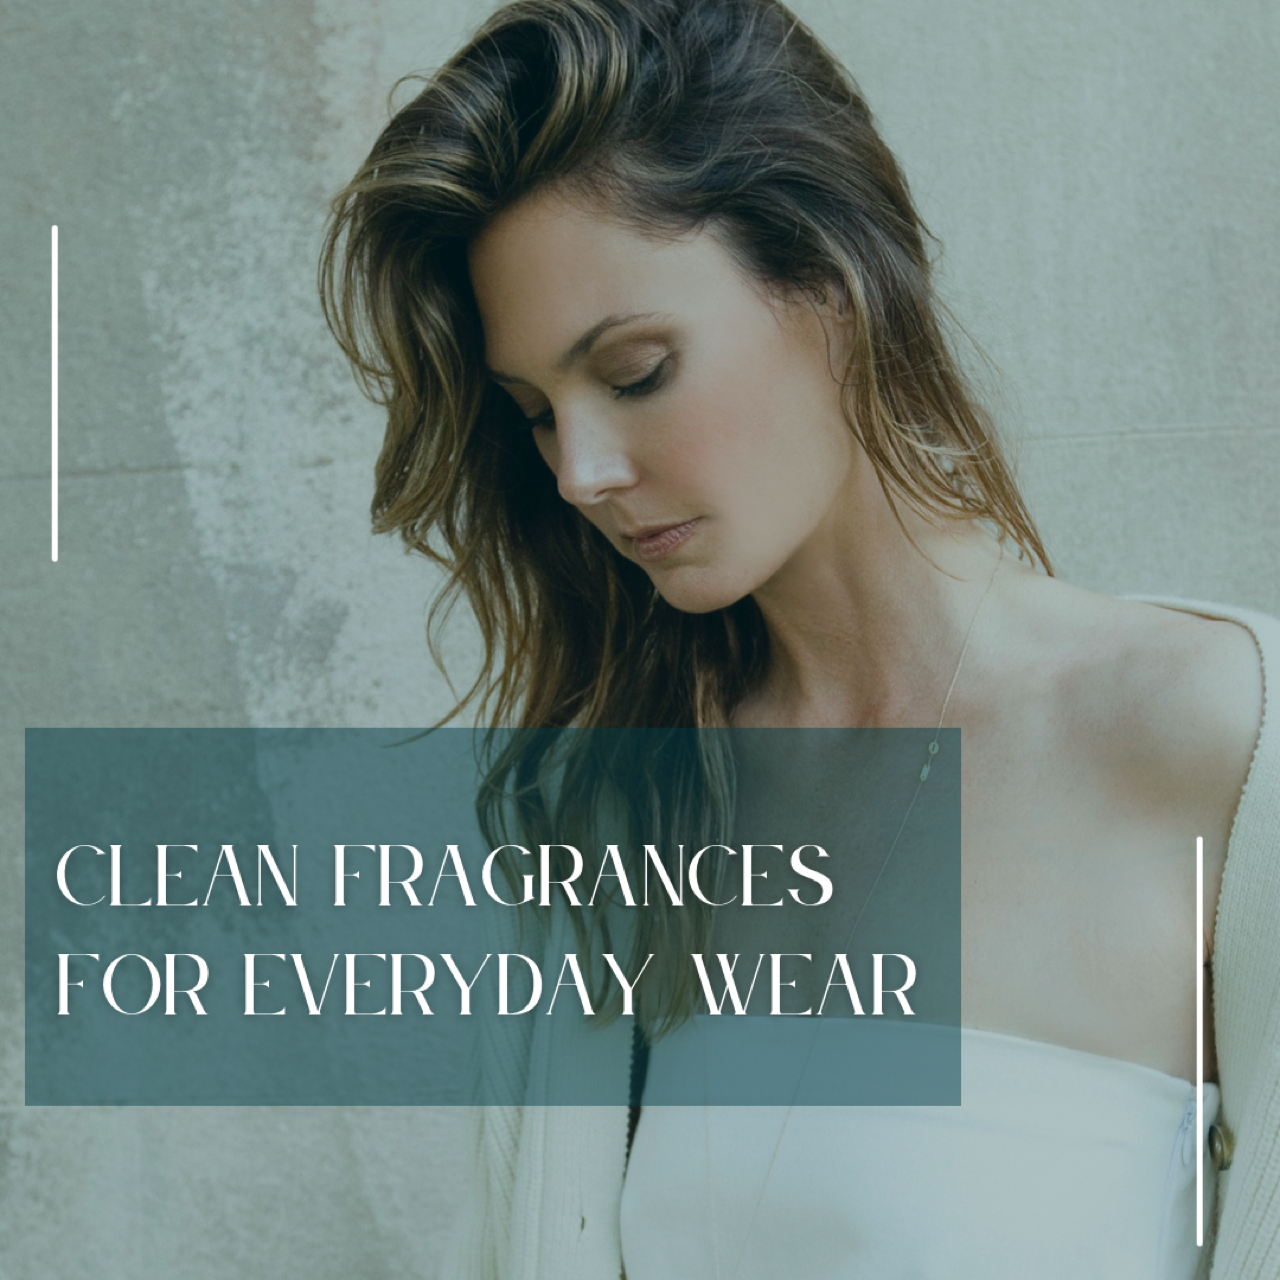 Clean fragrances for everyday wear